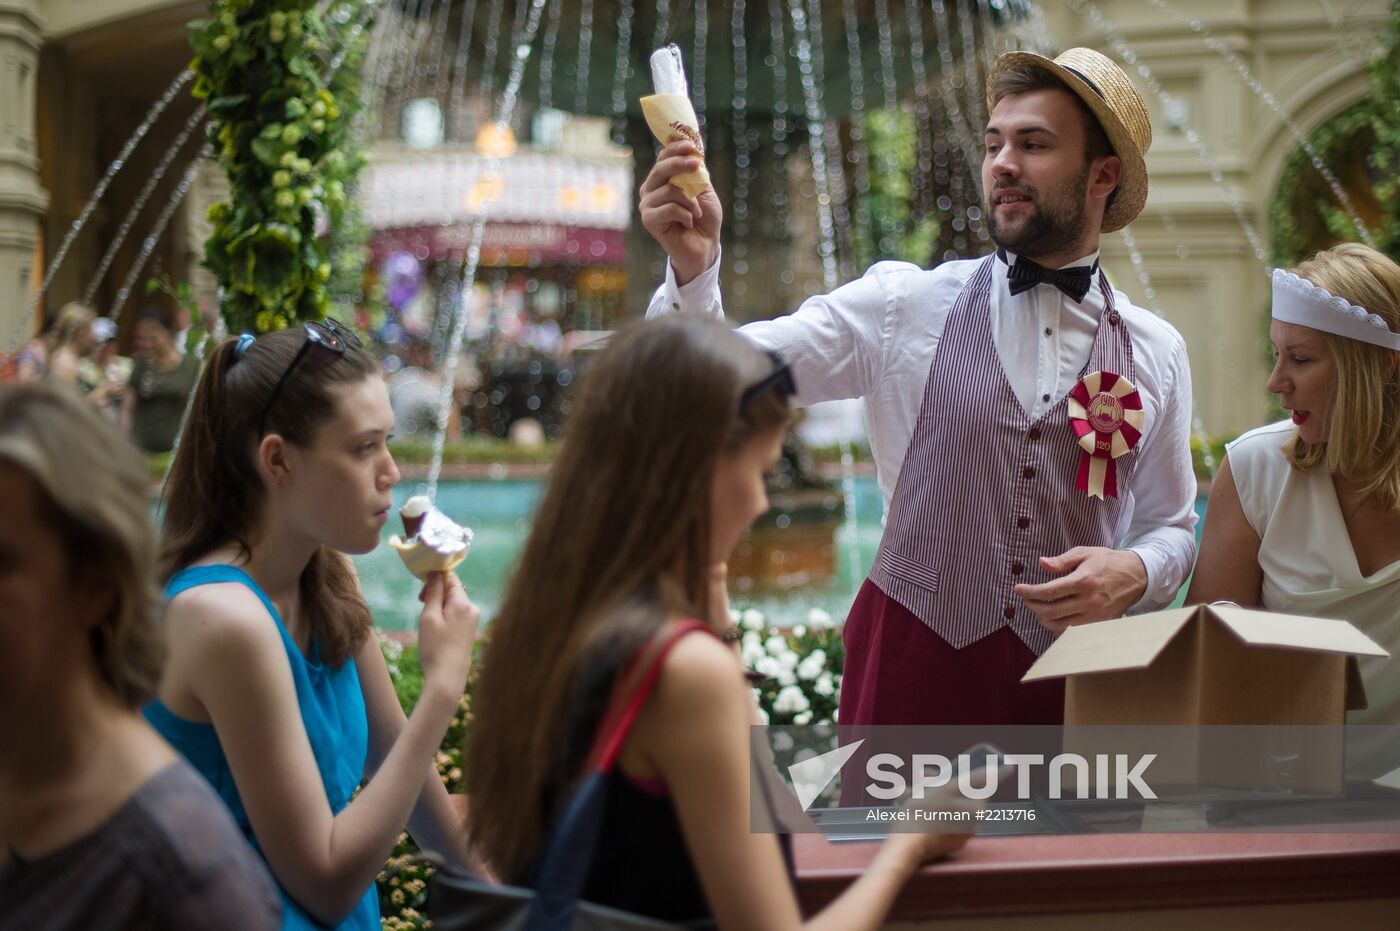 Ice cream festival at Moscow's GUM department store